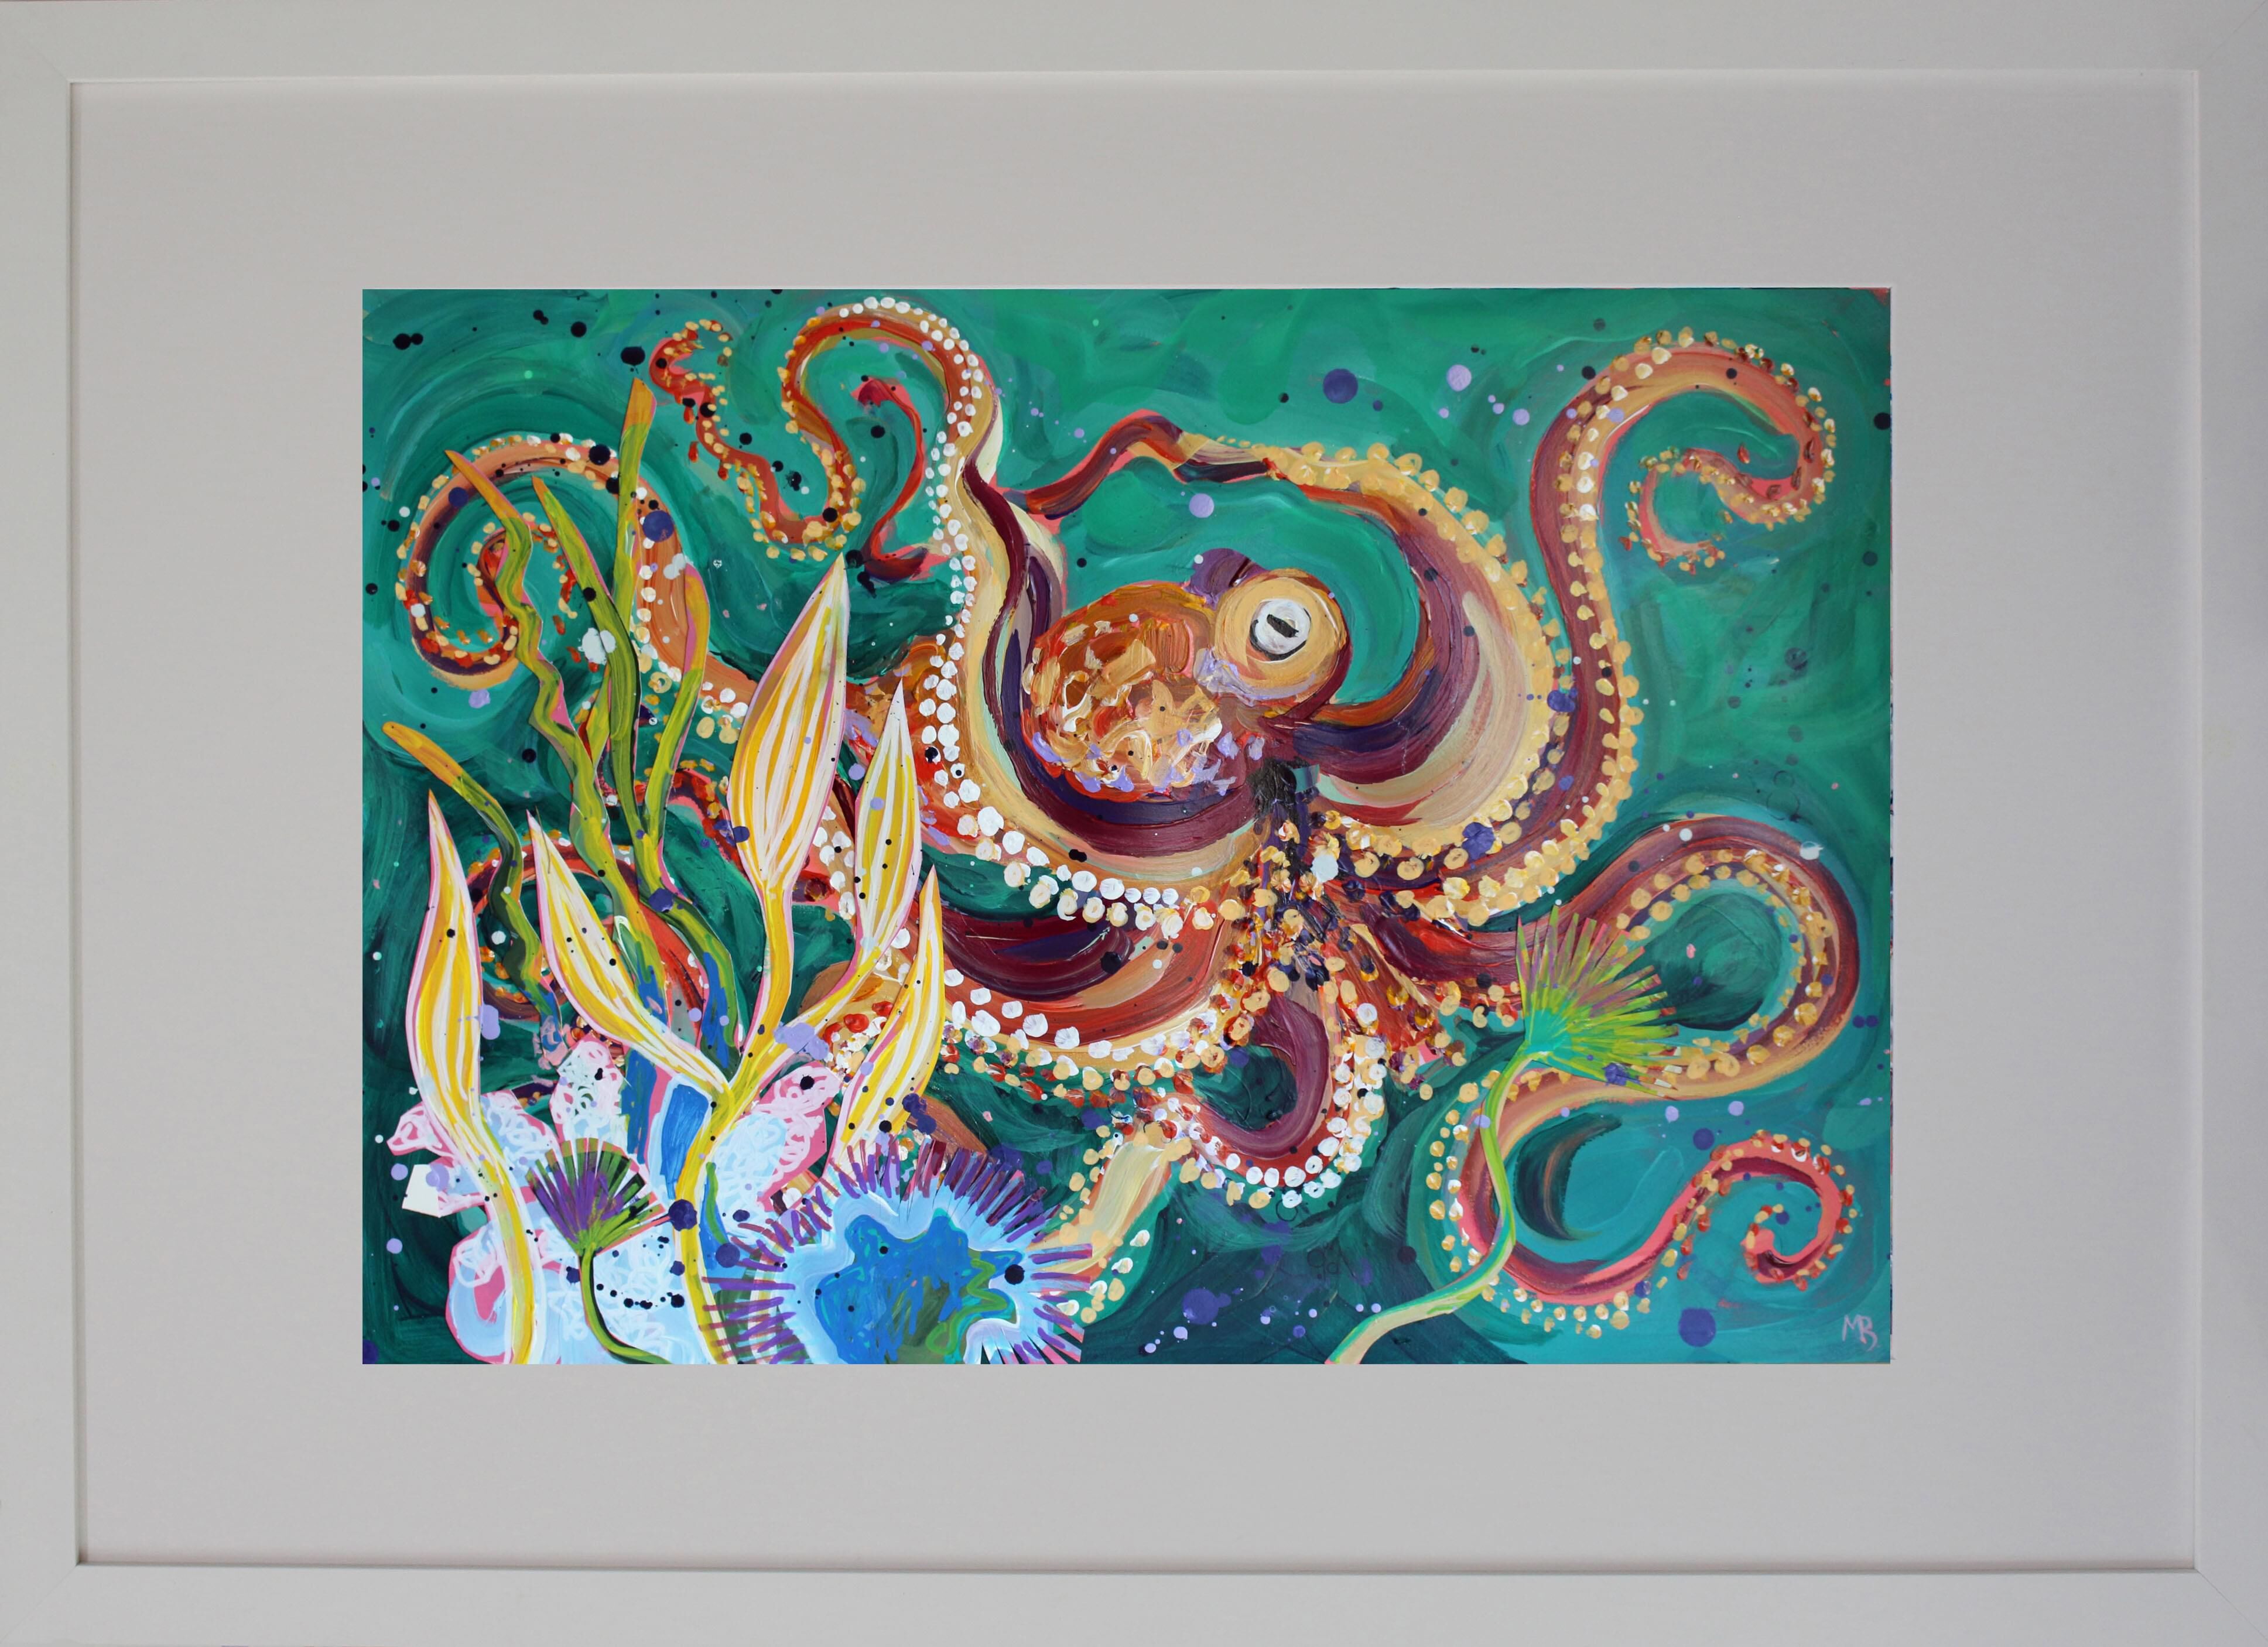 Octopus in yellow seaweed A2 image A1 frame Megan_Barrass 1mb